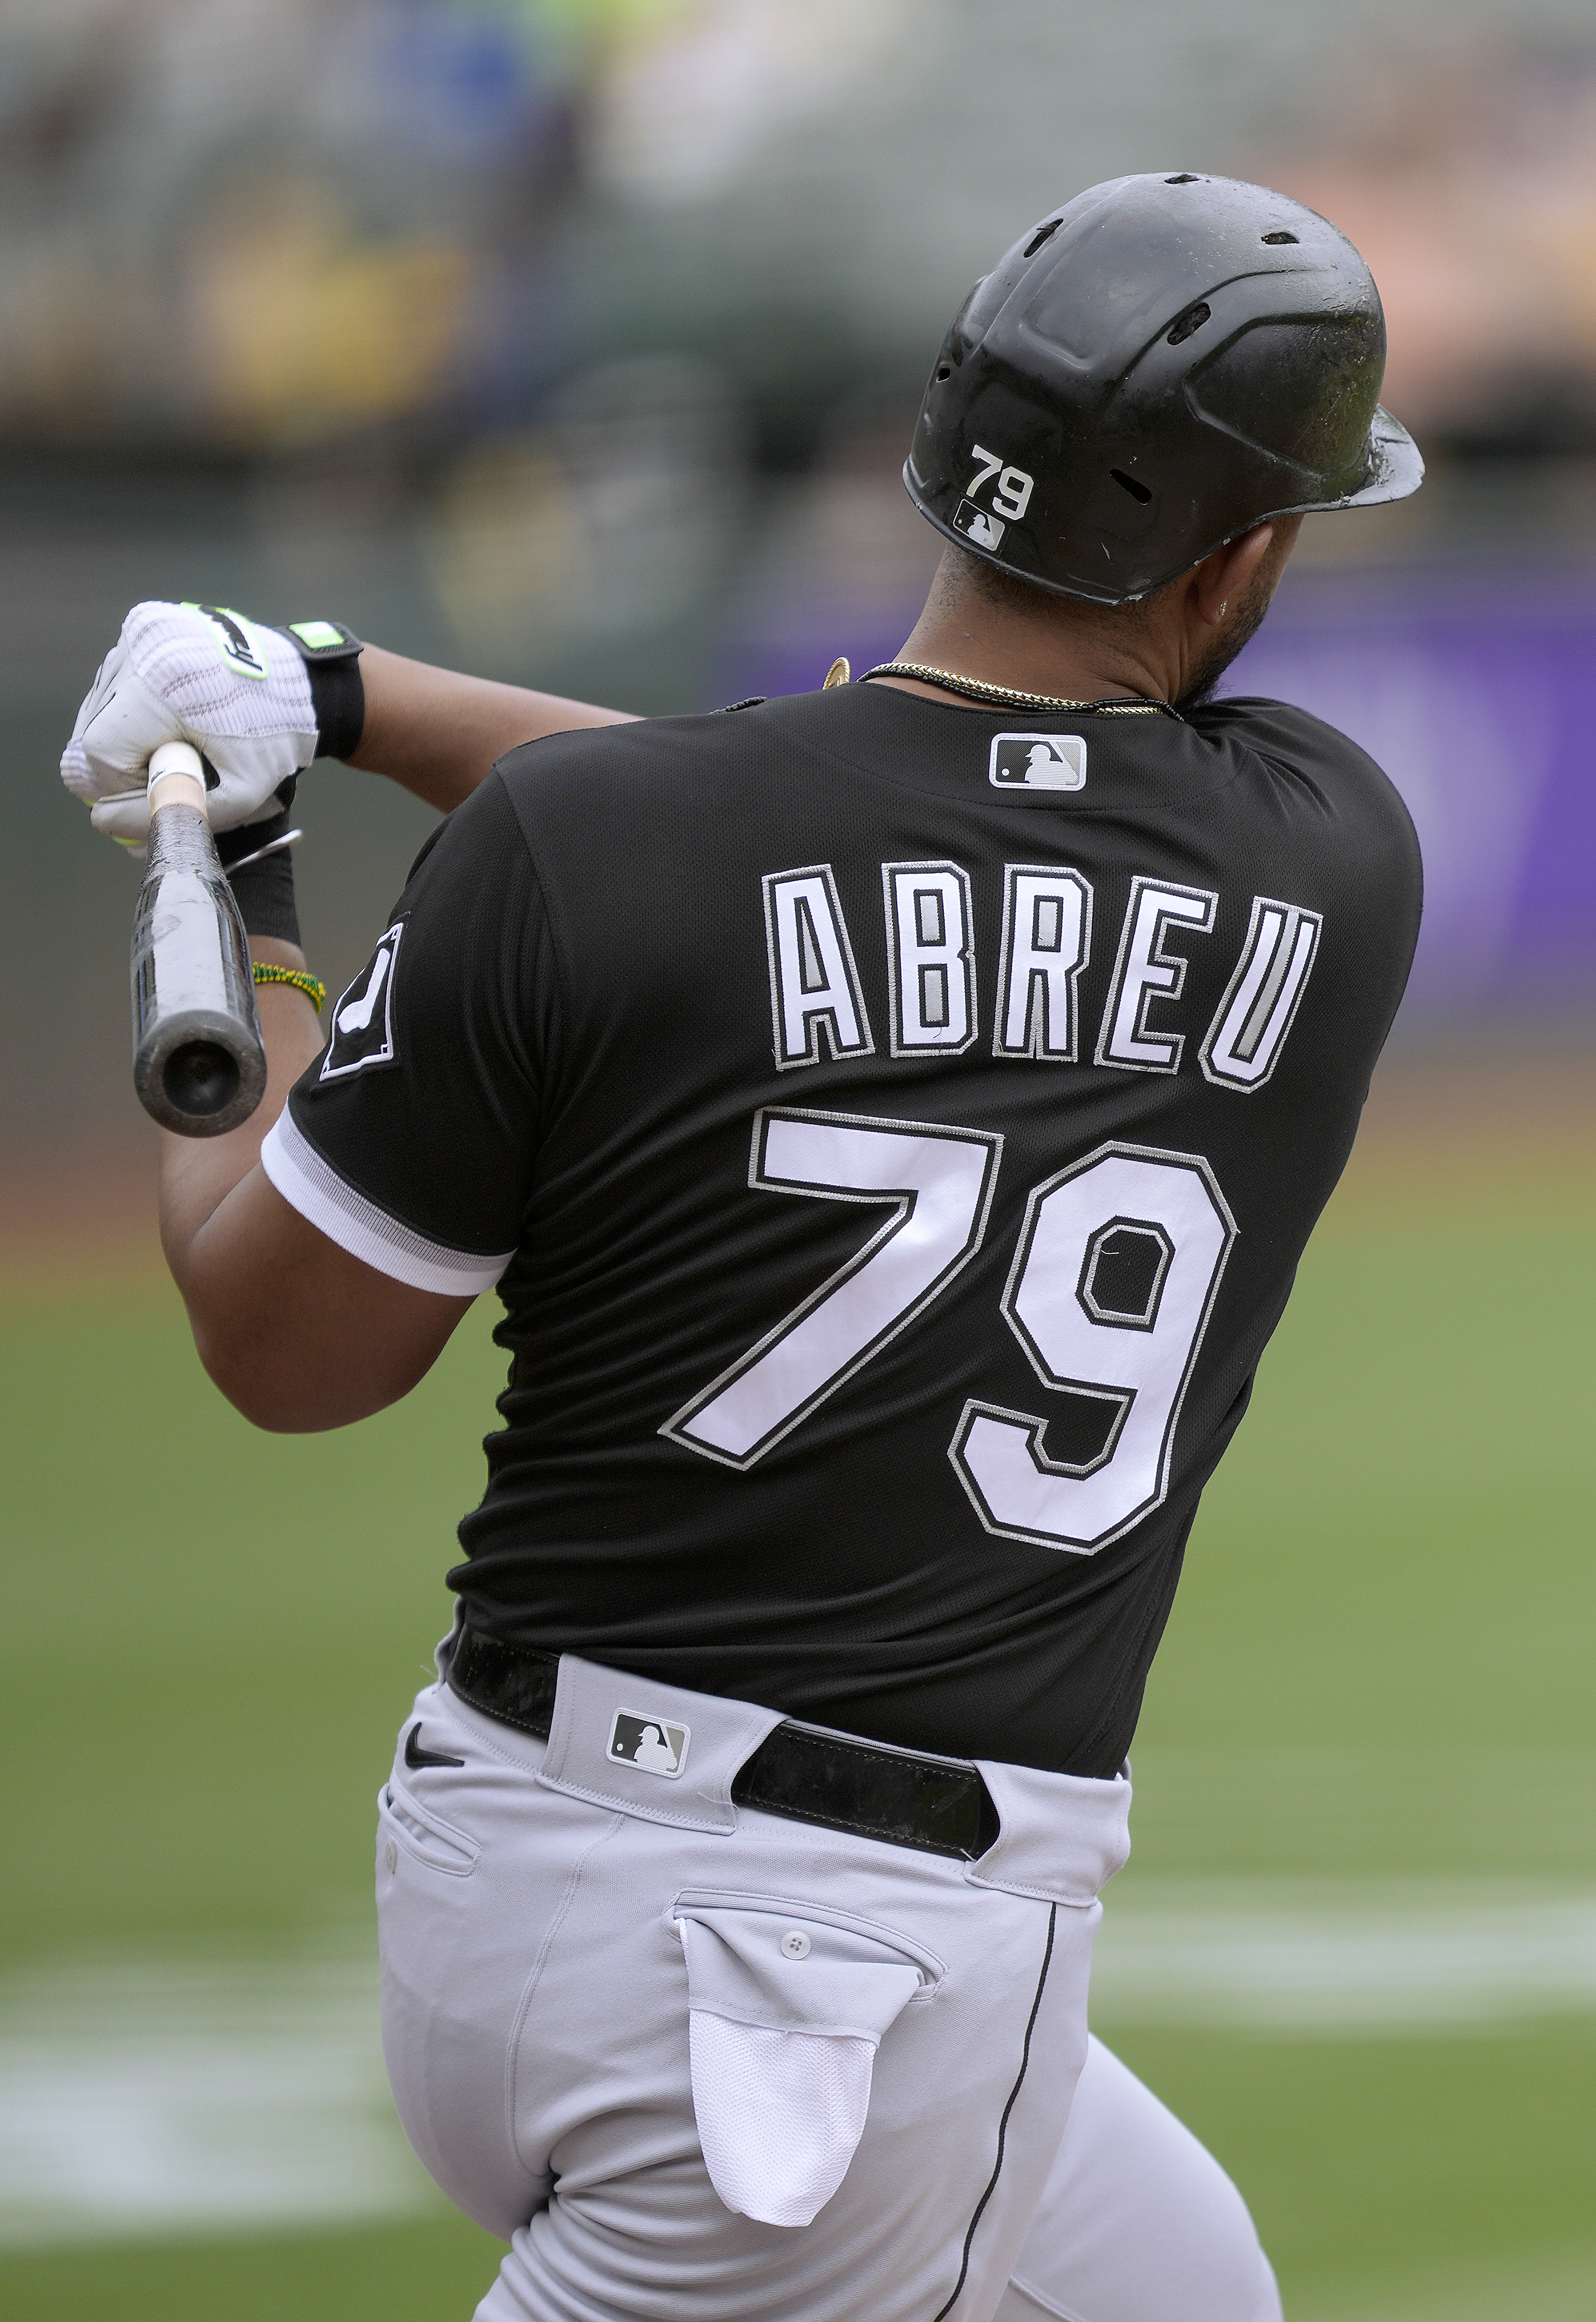 Jose Abreu #79 of the Chicago White Sox bats against the Oakland Athletics in the top of the first inning at RingCentral Coliseum on September 10, 2022 in Oakland, California.